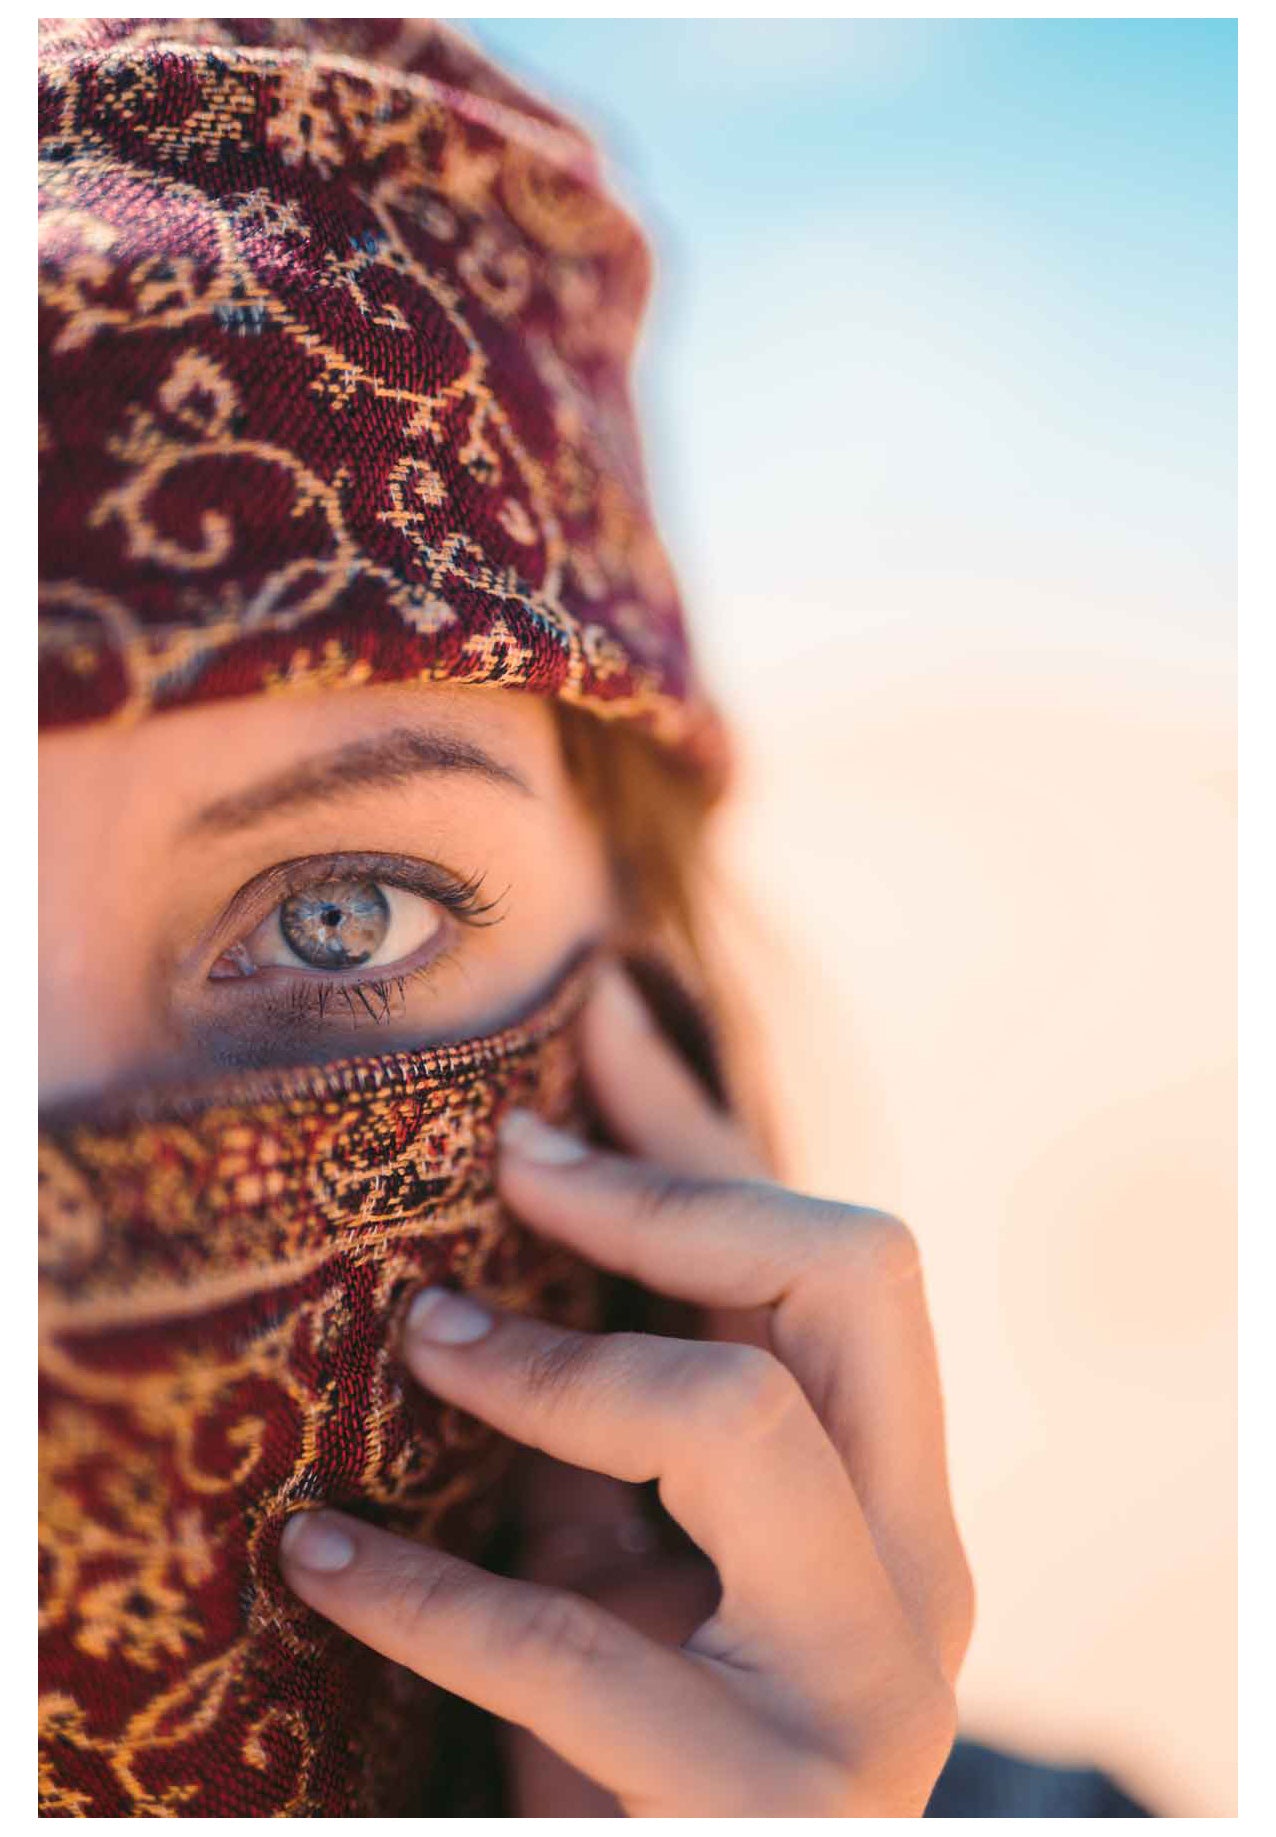 Girl with green eyes protects her skin from desert sunlight with cloth